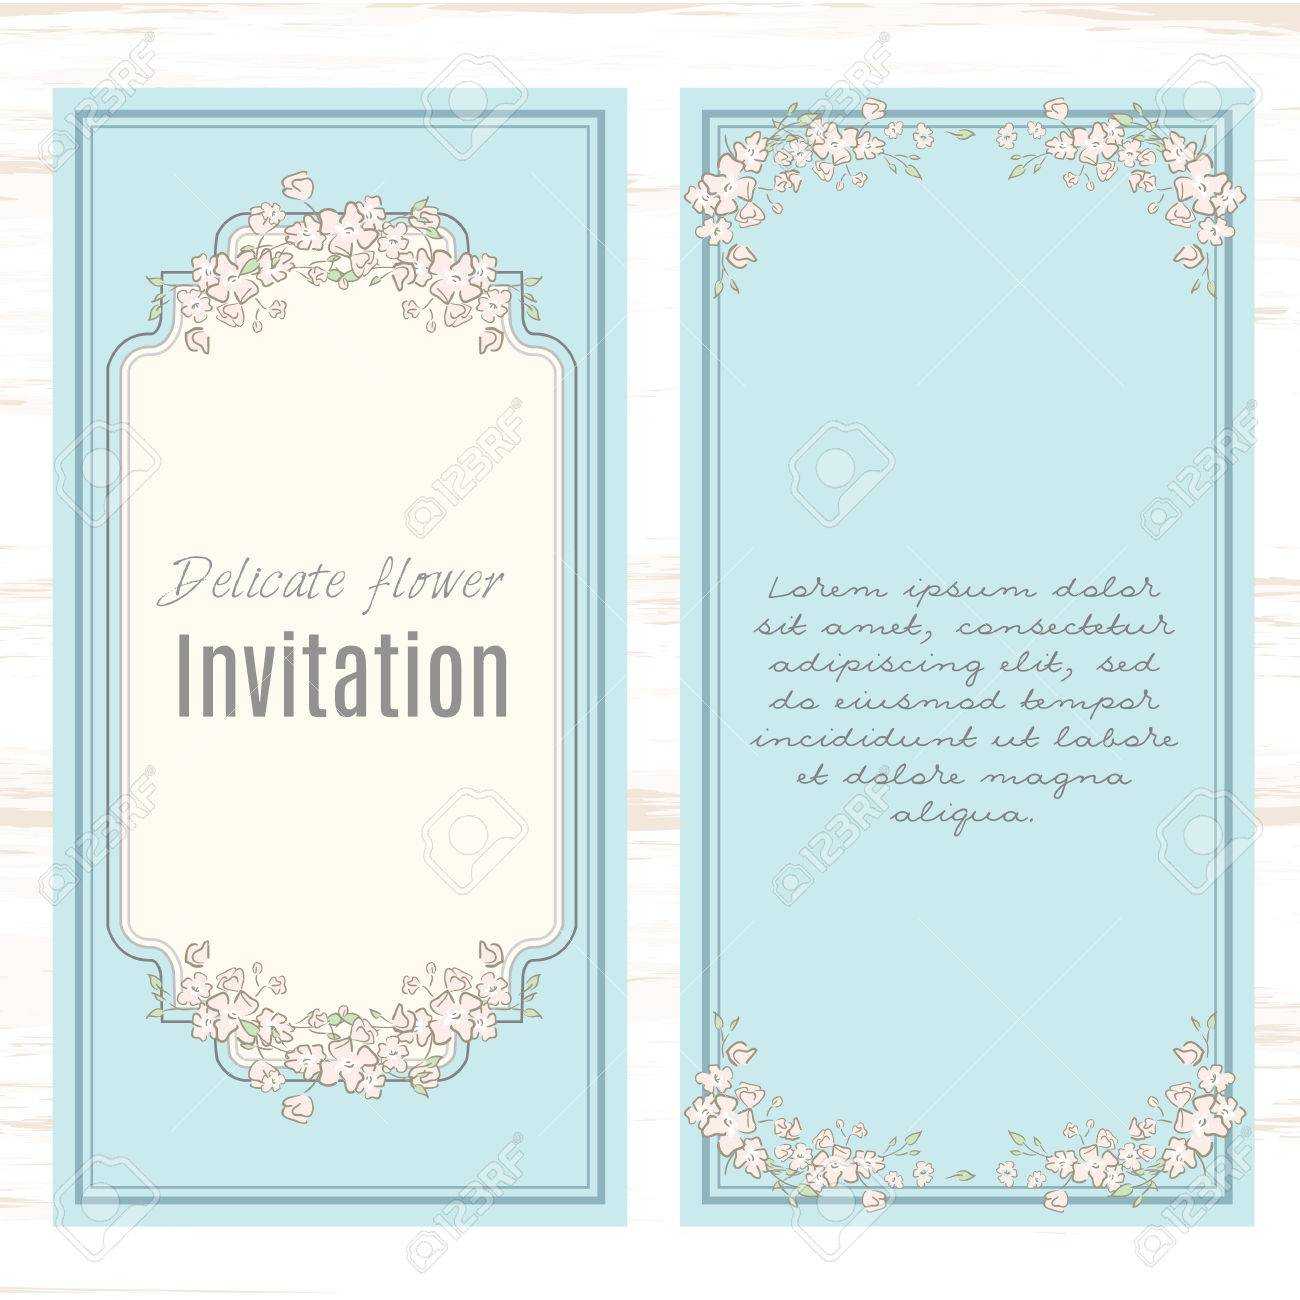 Greeting Card Template Floral Background. Design Stationery Set.. Throughout Greeting Card Layout Templates